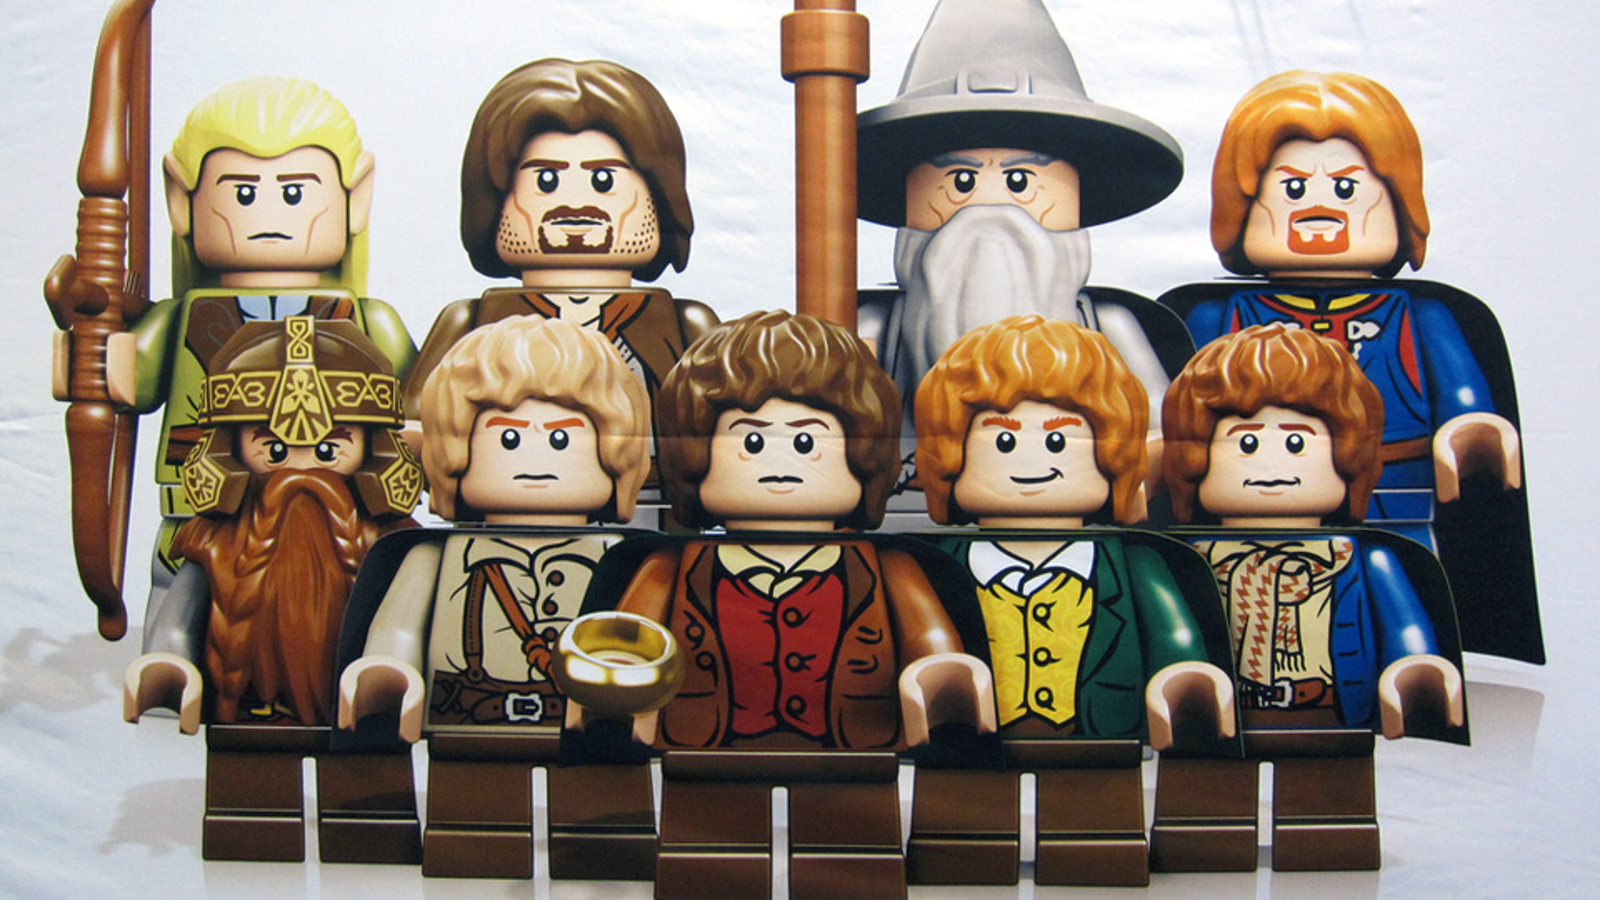 lego lord of the rings dlc pc